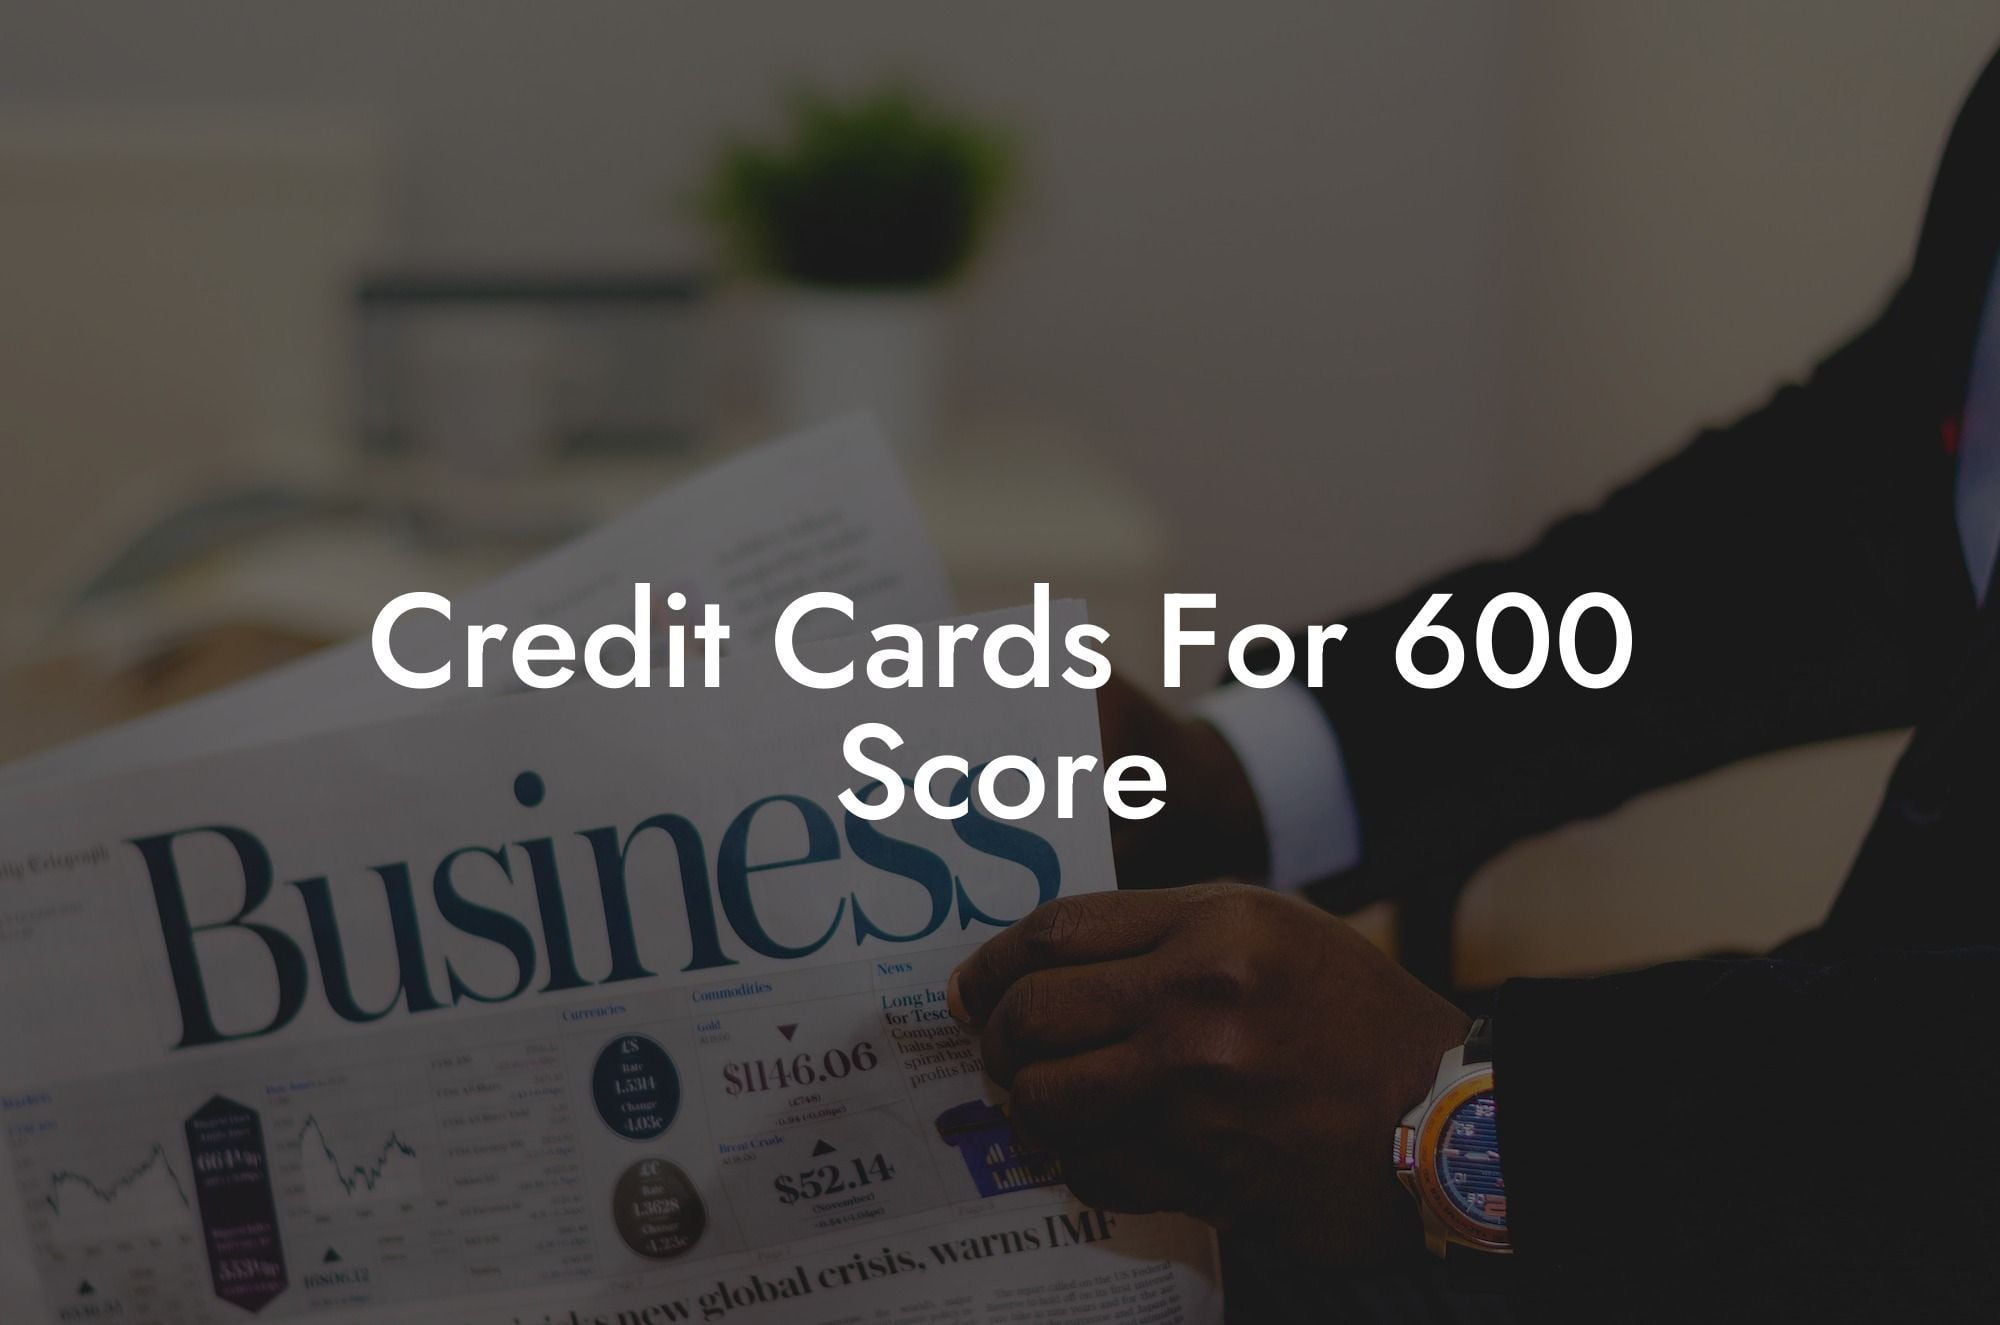 Credit Cards For 600 Score